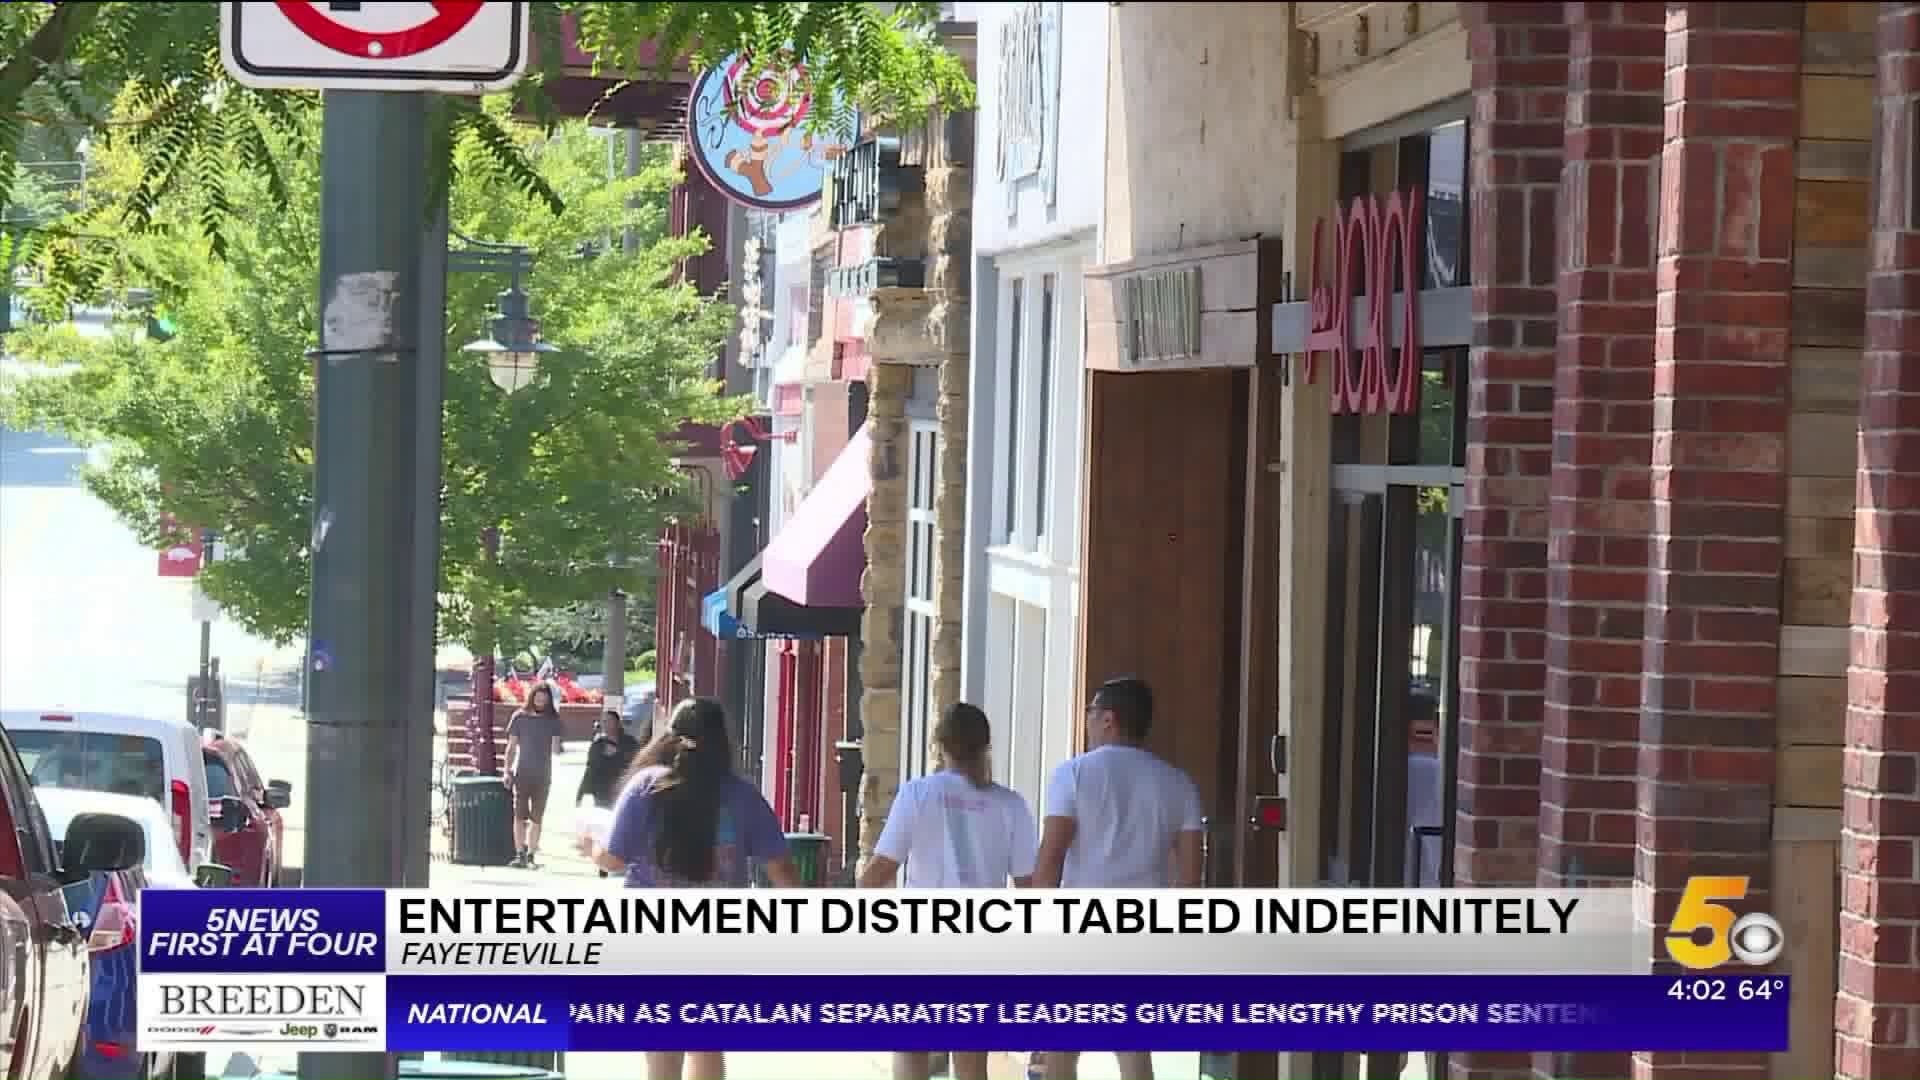 Fayetteville Entertainment District Tabled Indefinetely